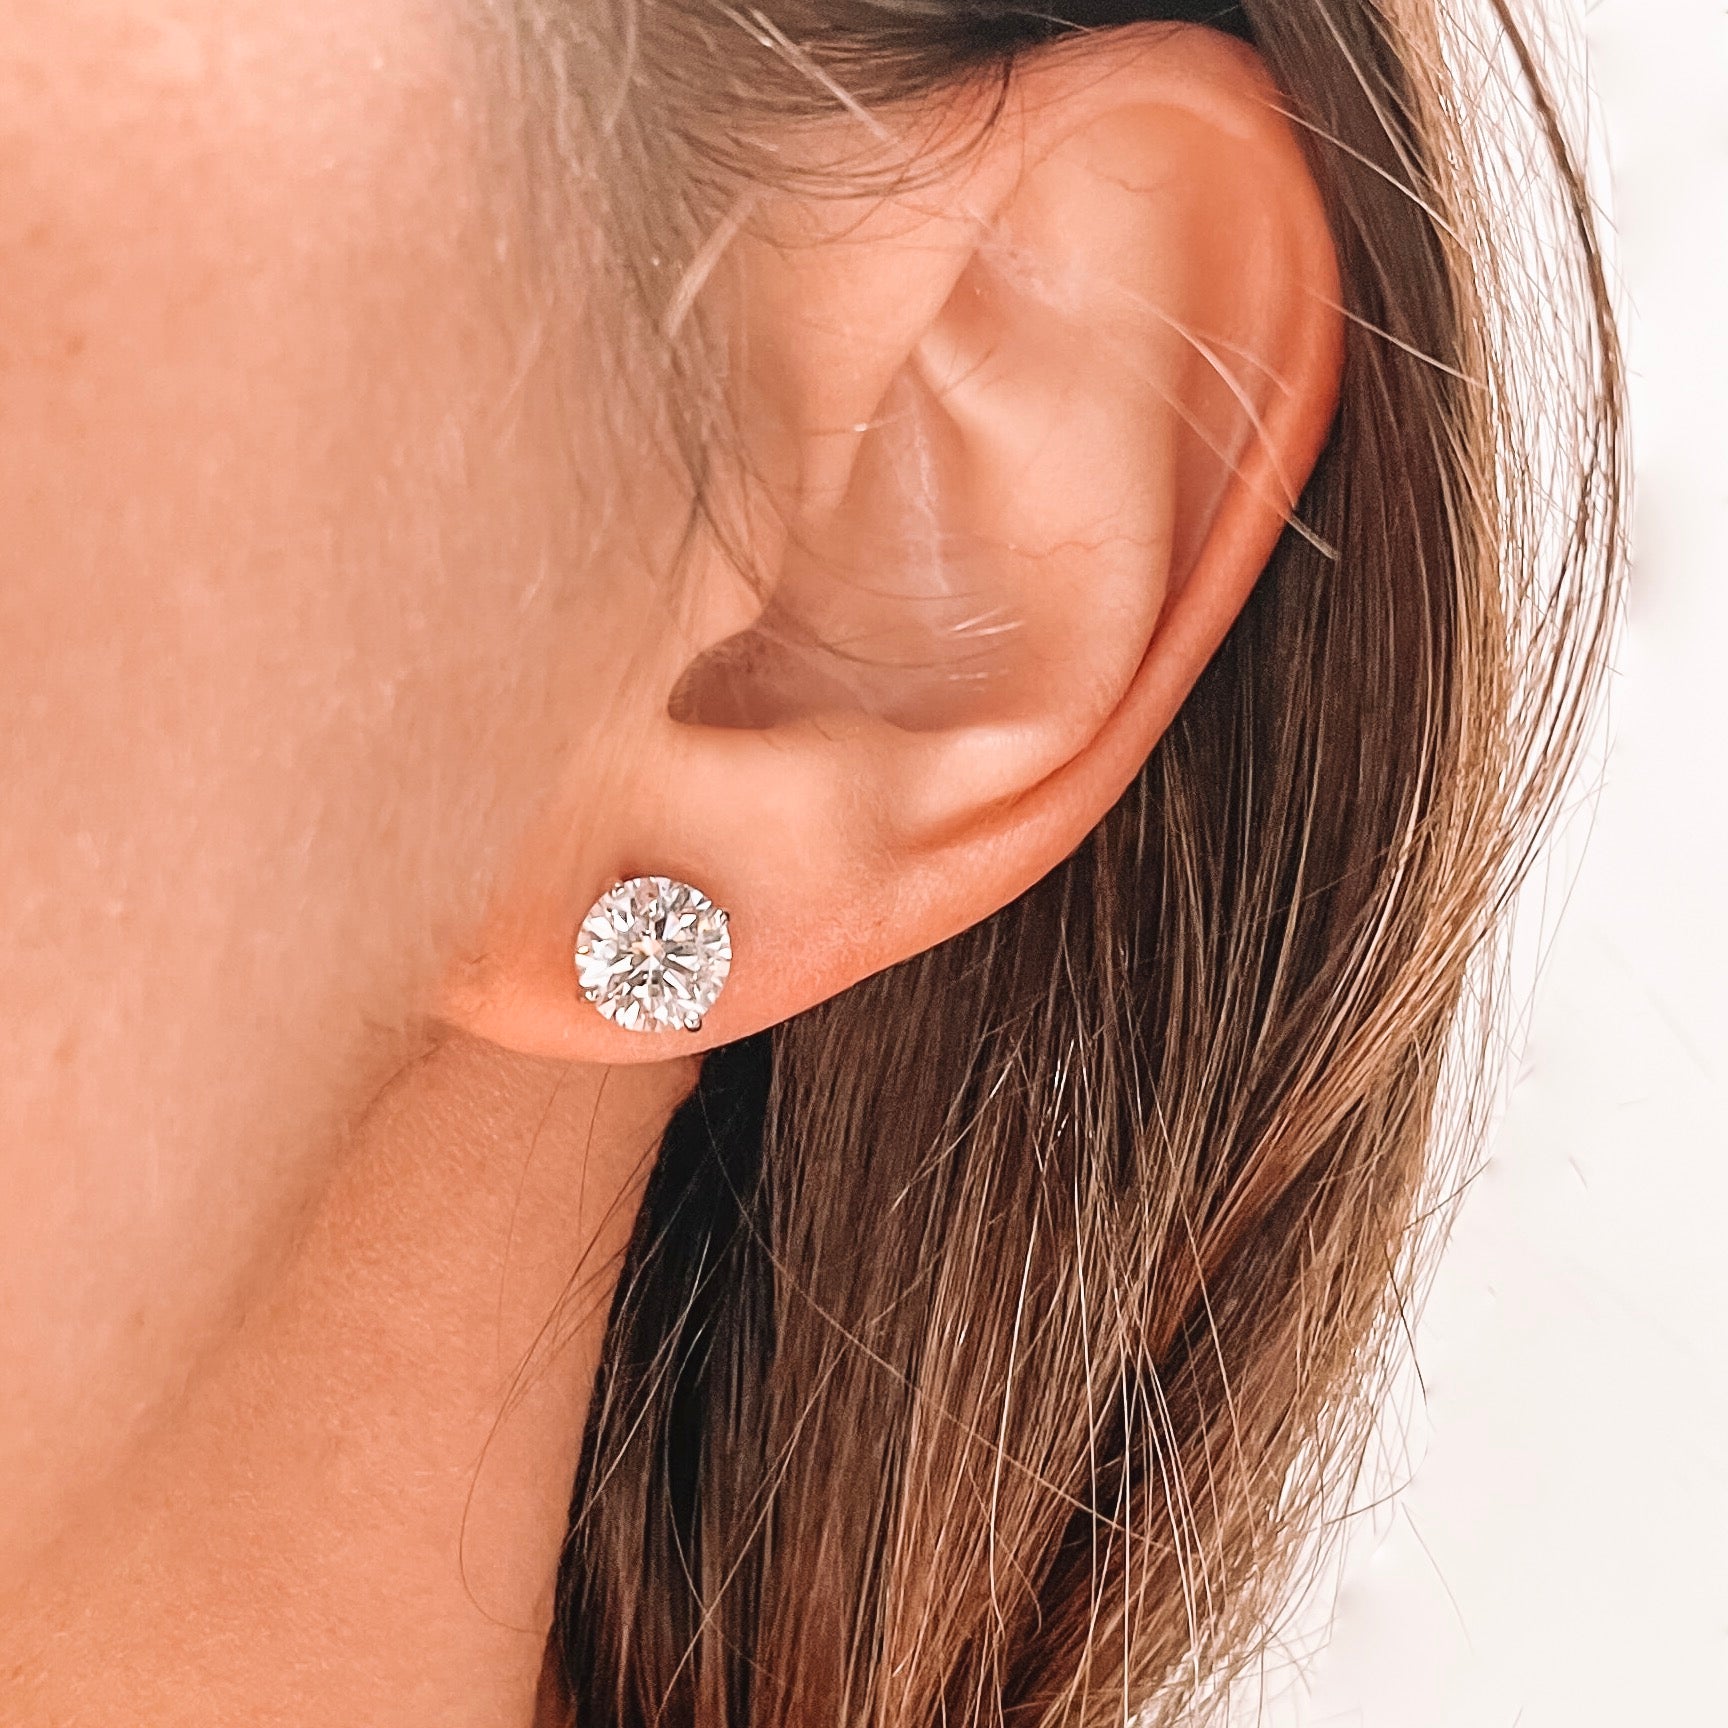 Shop Diamond Stud Earrings At Wholesale Prices